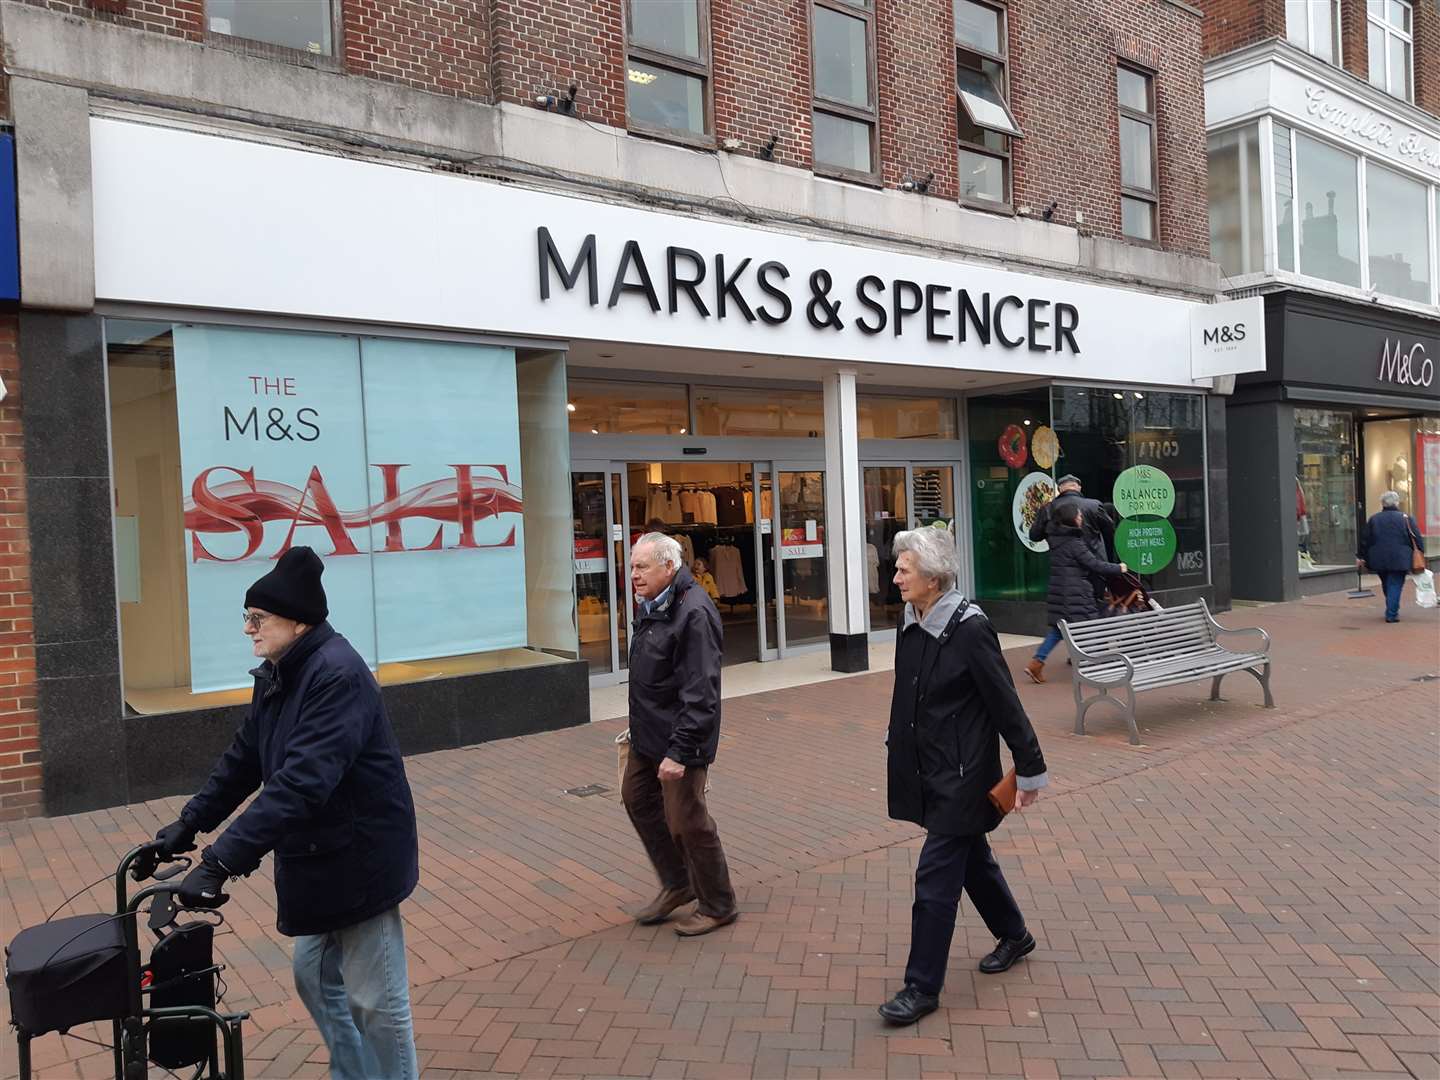 Deal's M&S